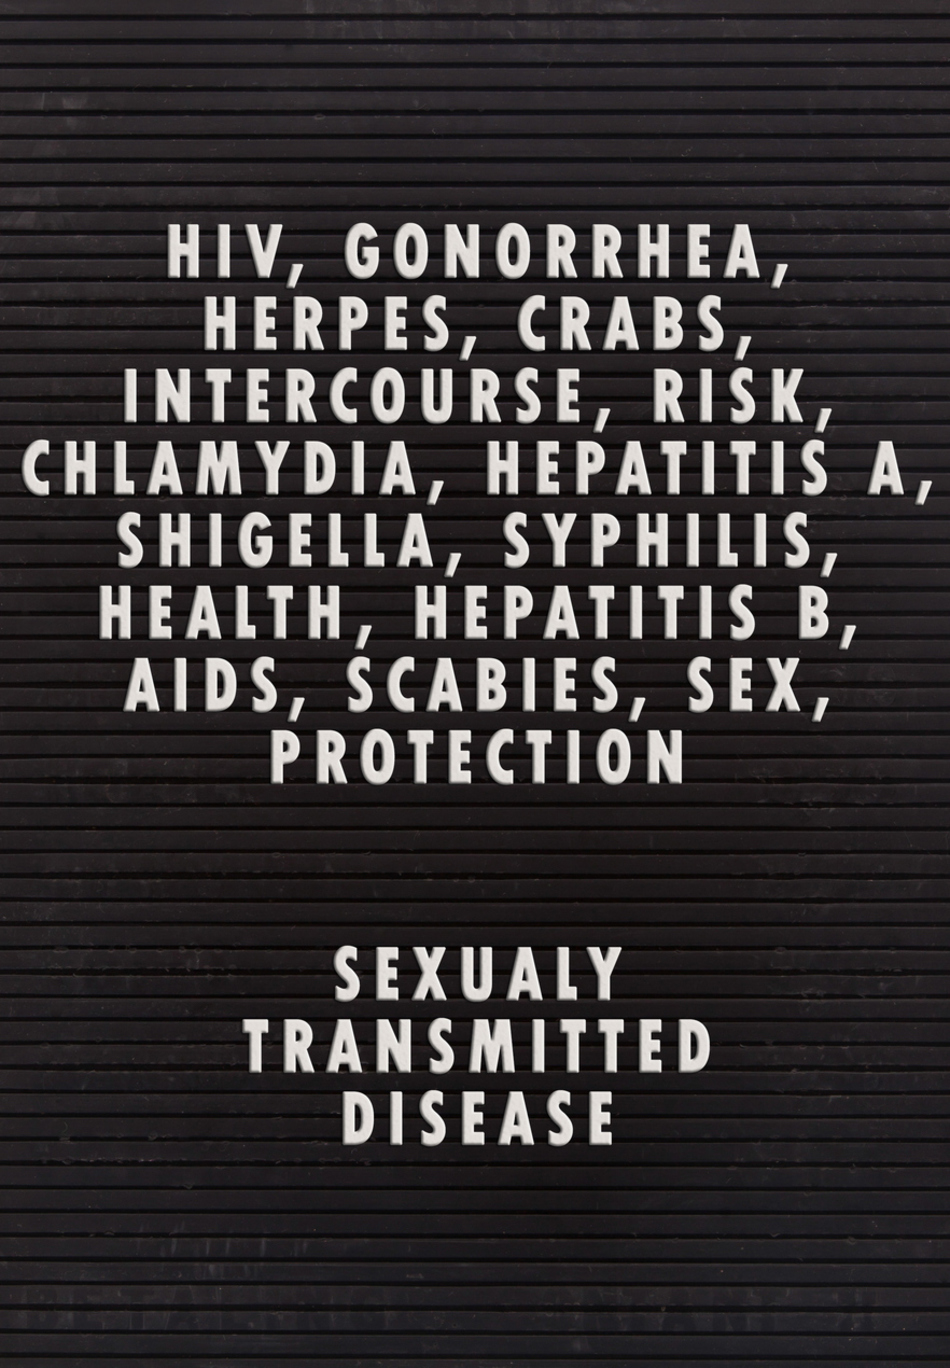 Teens Are At Risk for STDs